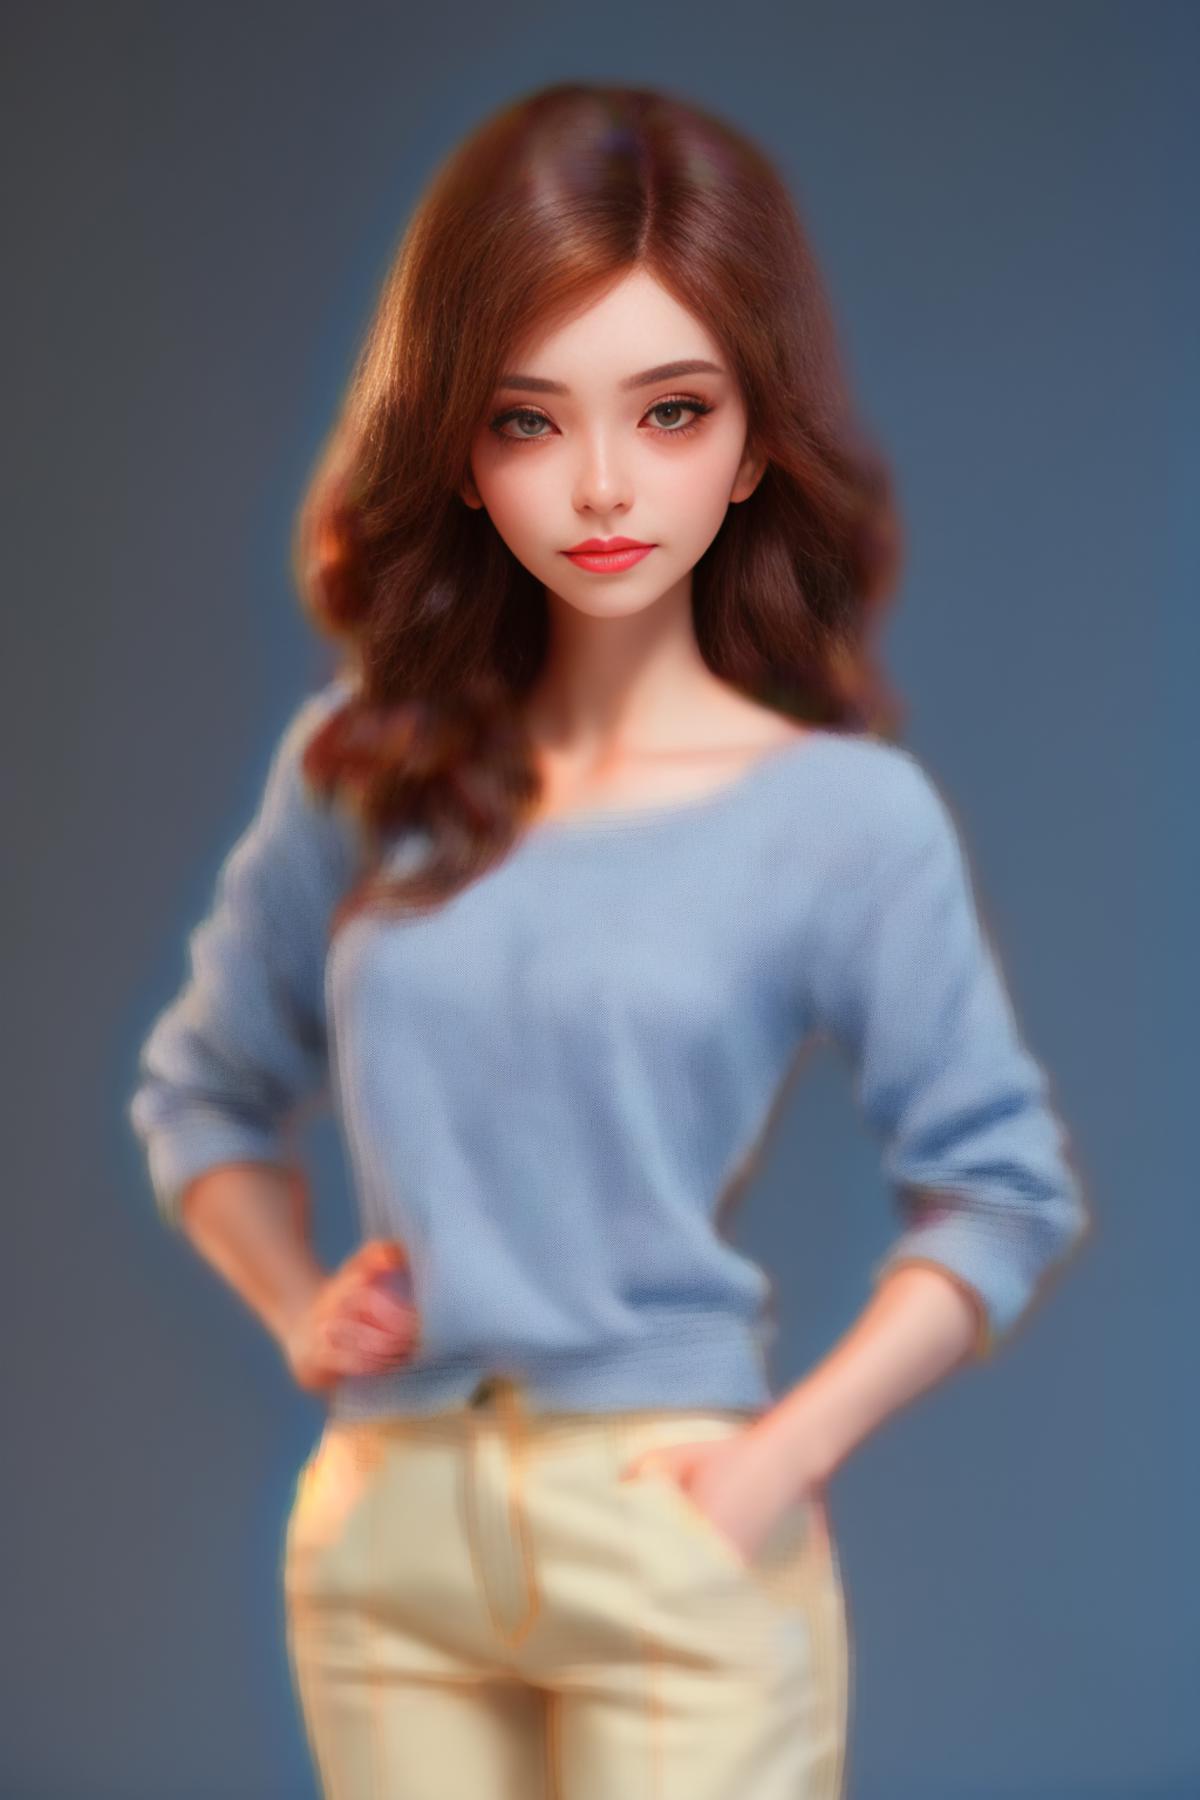 AI model image by mit_itg